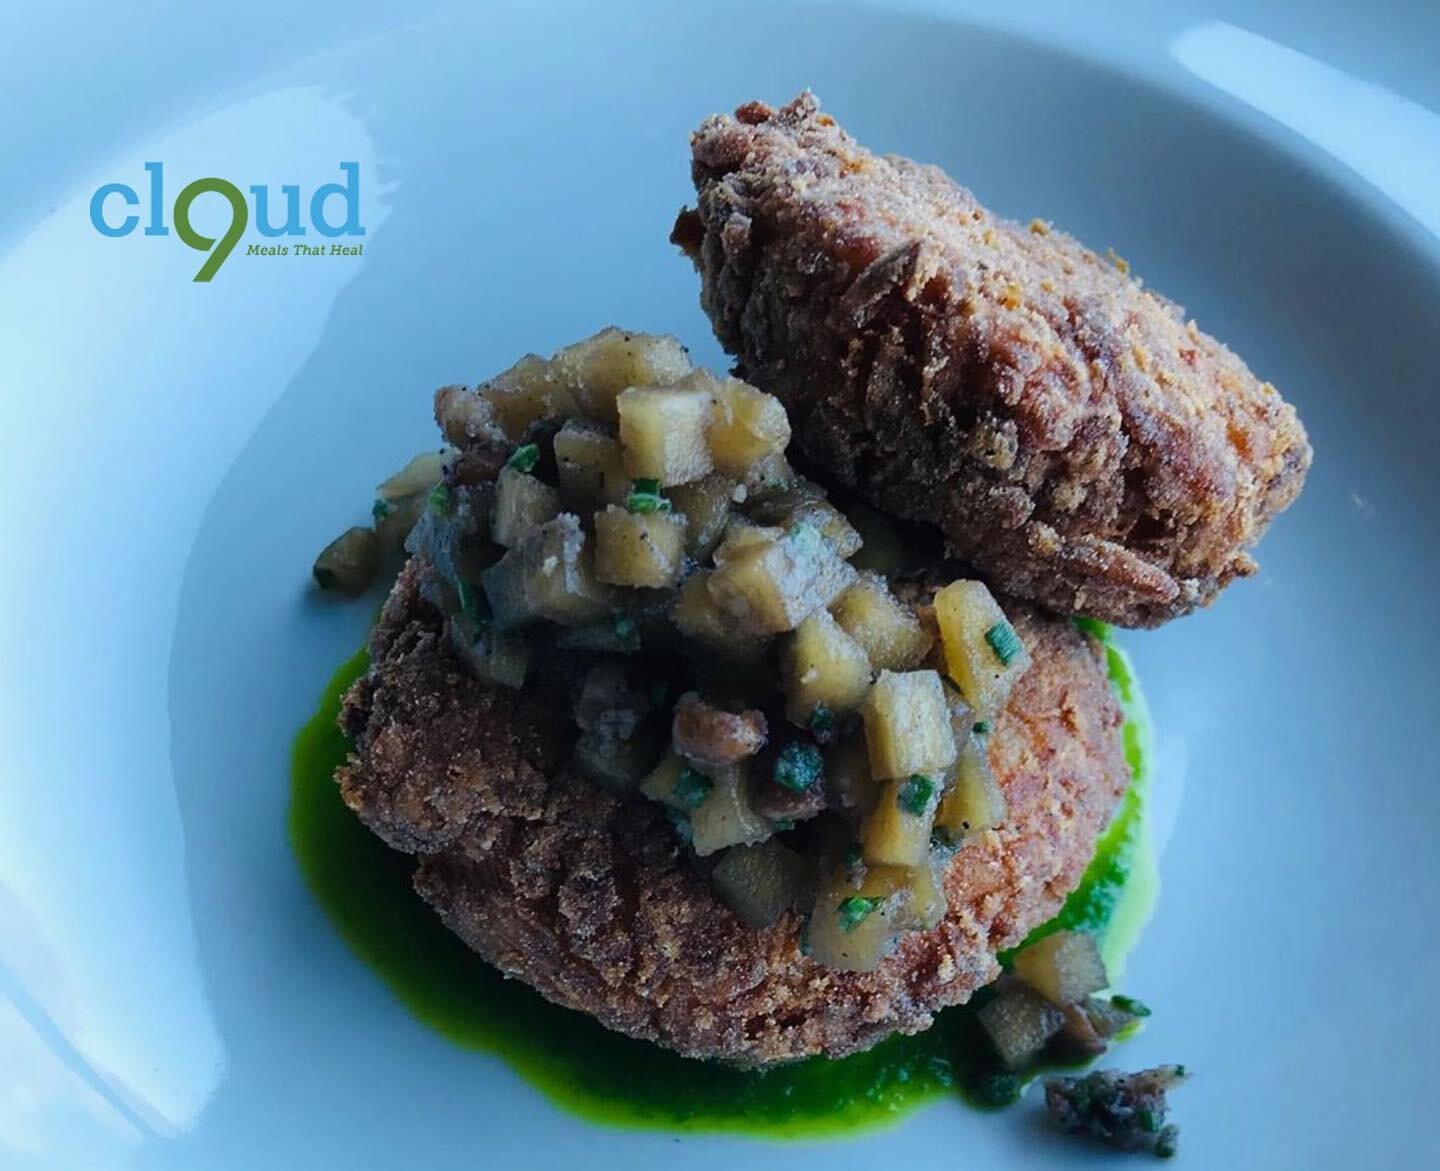 Lobster Potato Cakes, with Infused Brown Butter Apple Pecan Conserve. Are you a cannabis chef? Join our global team. #cannabiscooking #mealsthatheal #cbd #cloud9meals #bodyoncloud9